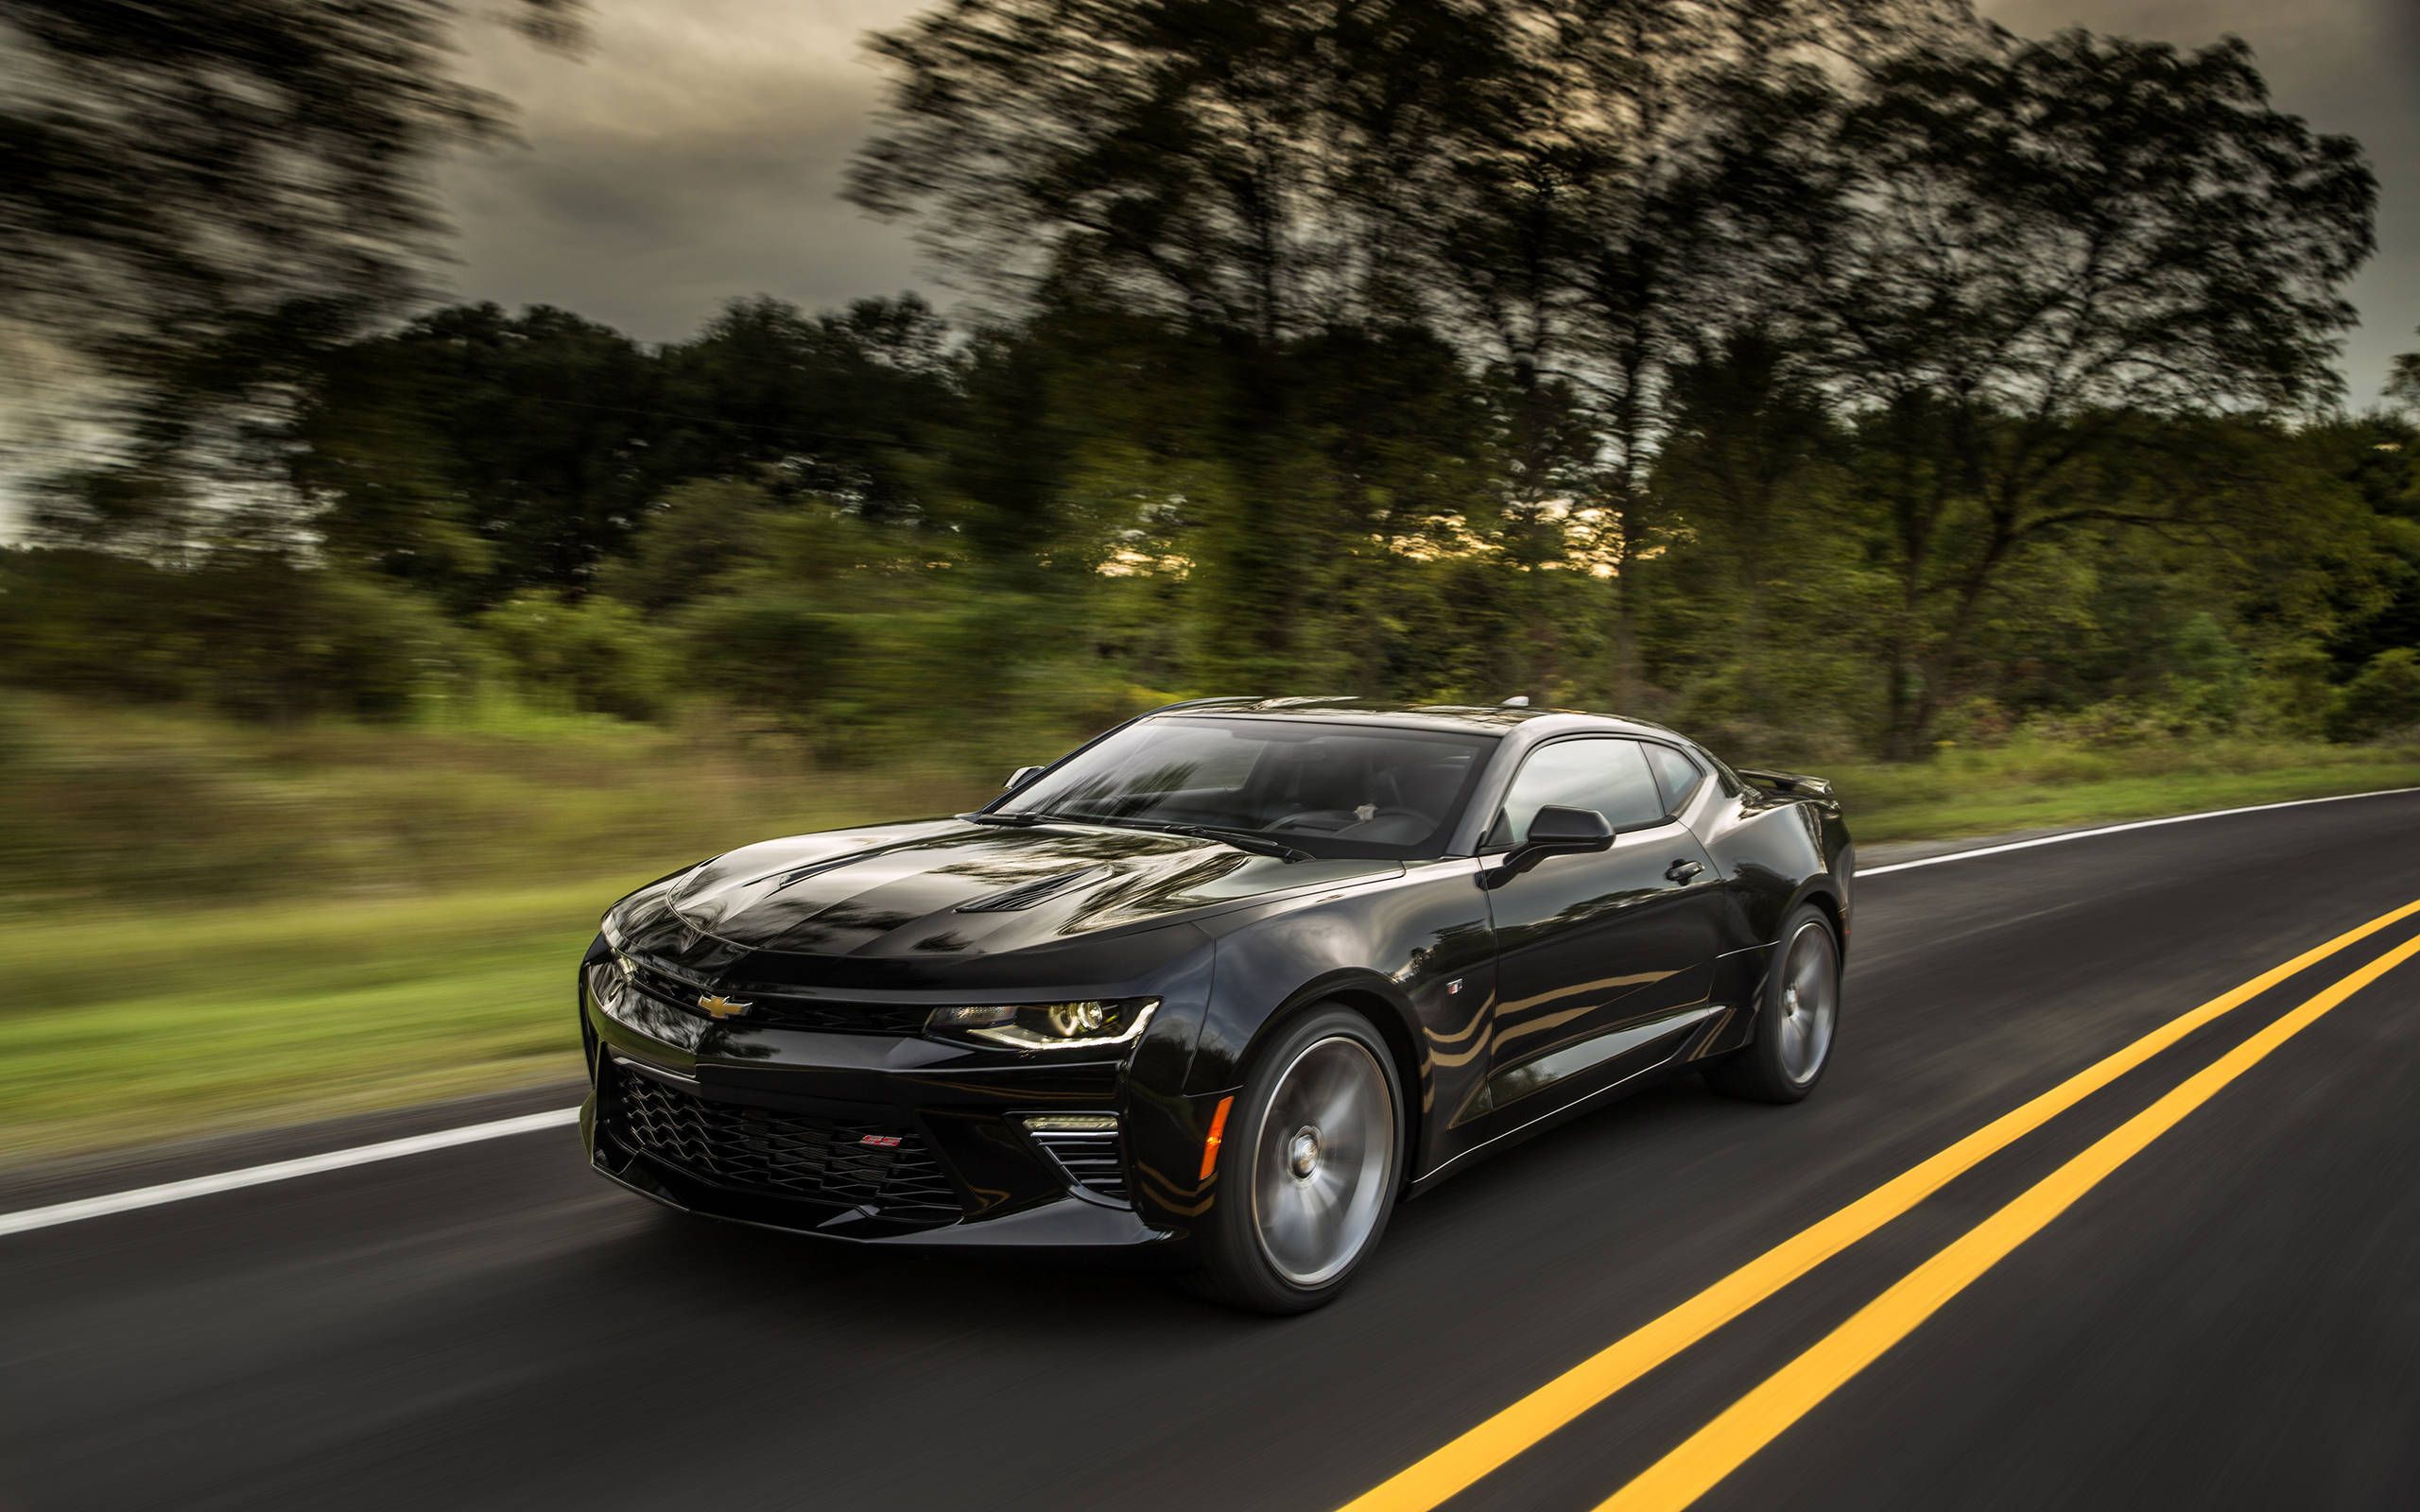 2016 Chevrolet Camaro SS Review: A True Sports Car at Last?